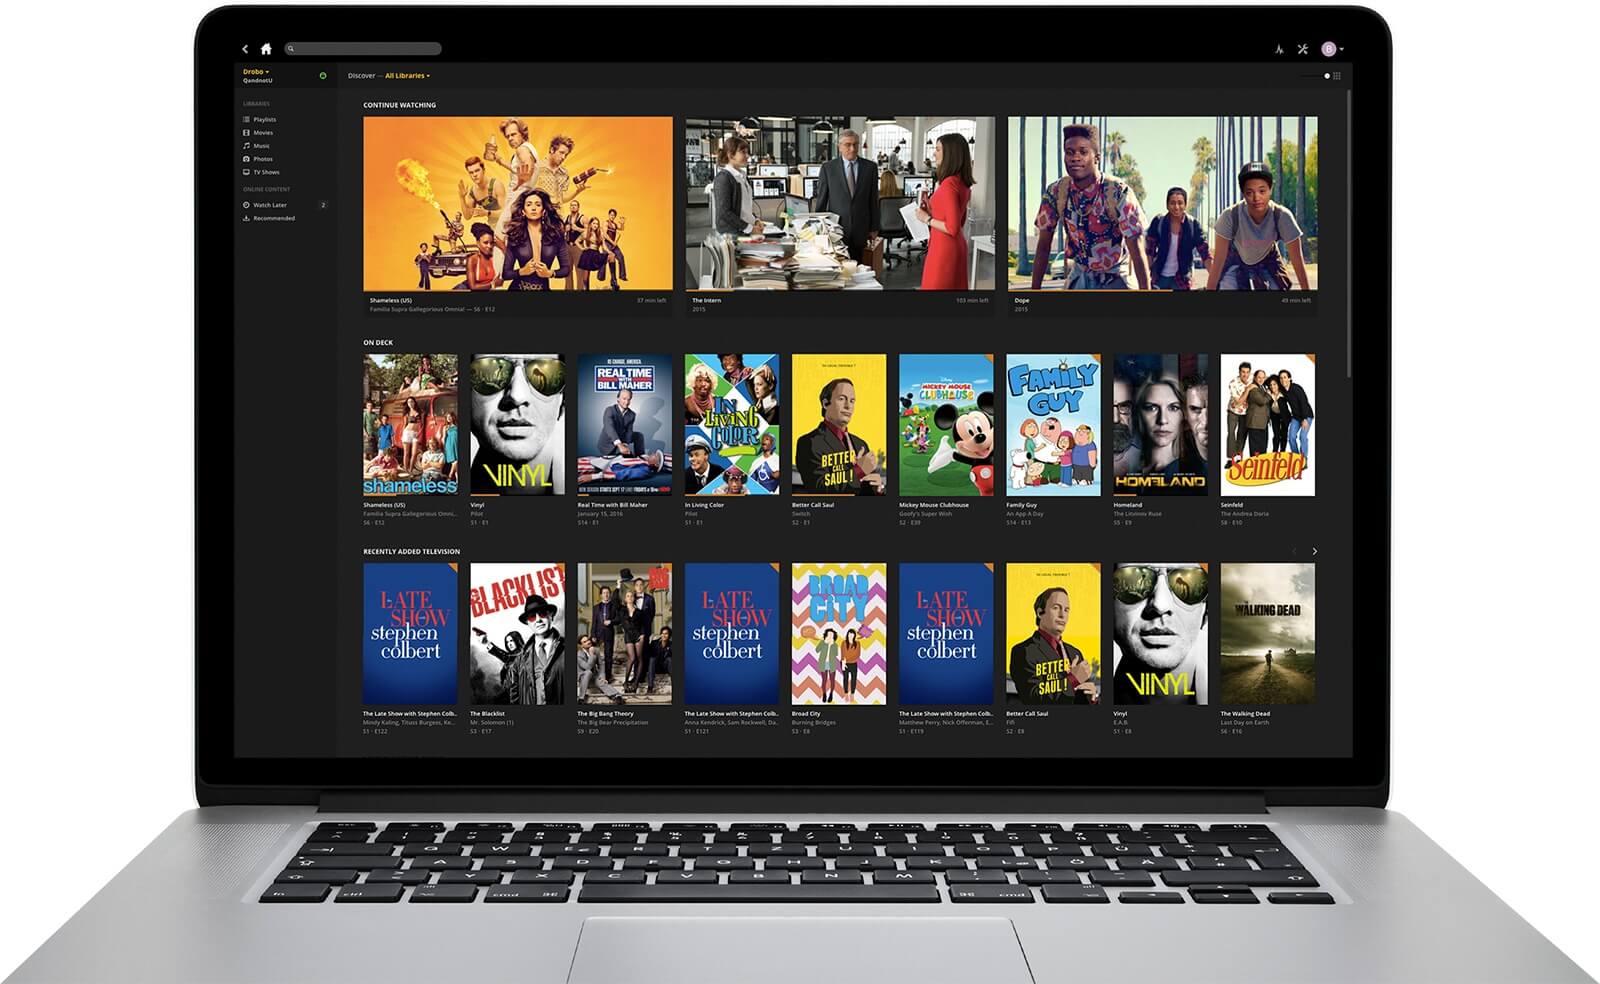 Plex introduces Live TV Broadcasts and DVR Support in Android devices 1